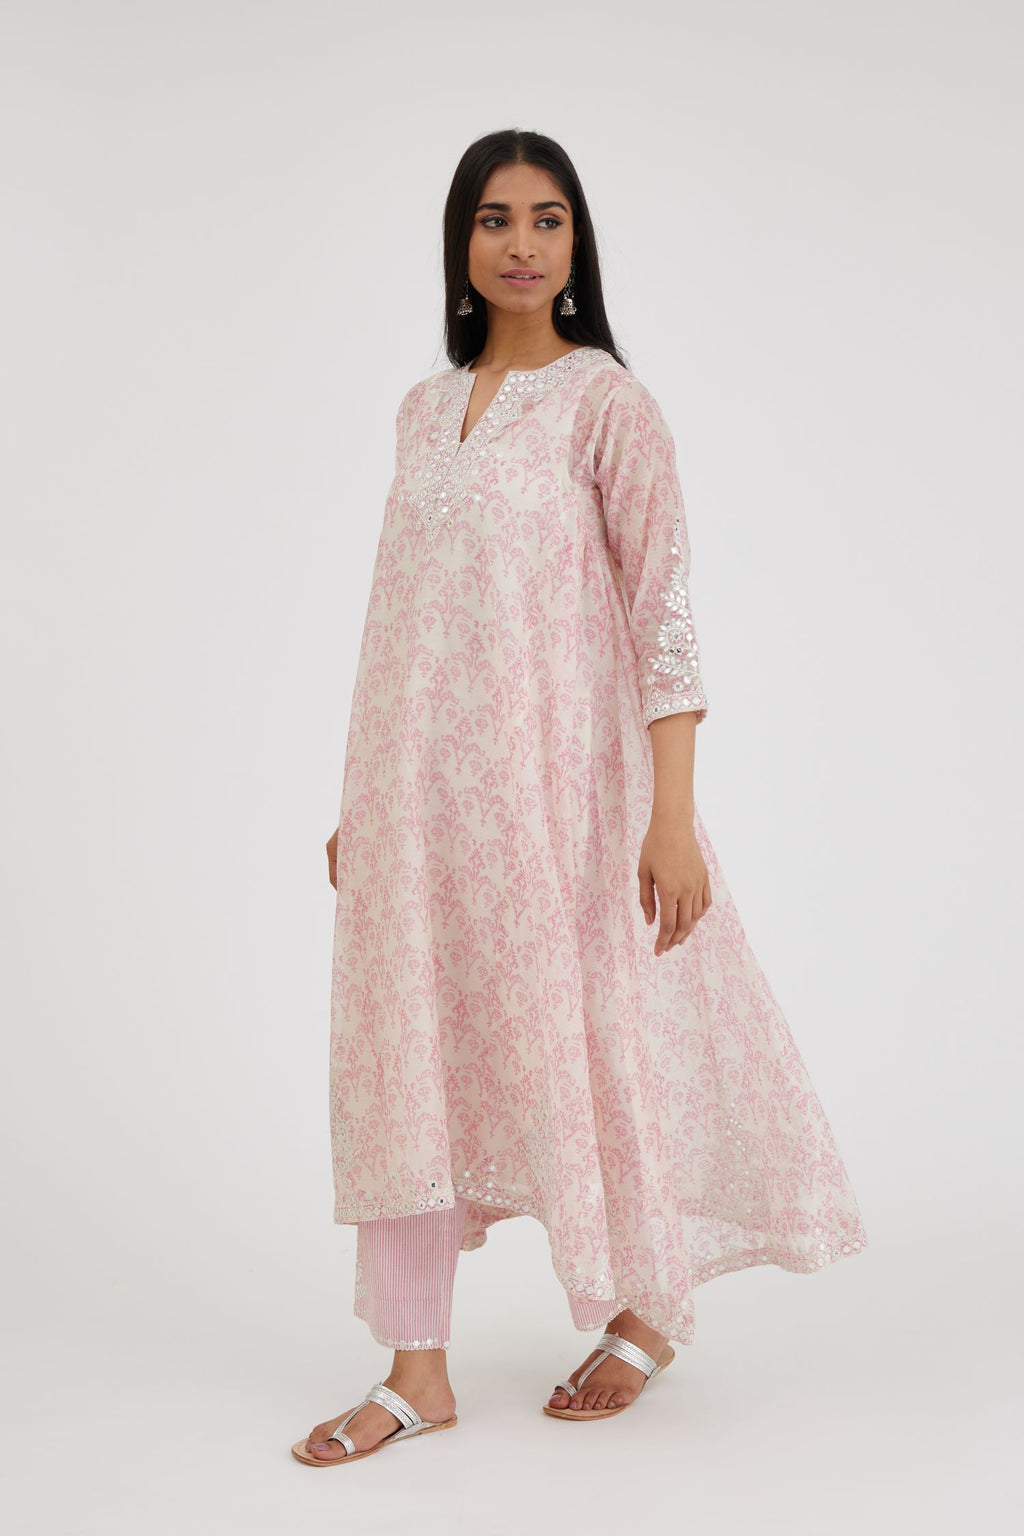 Ikat design pink and off white hand block-printed Cotton Chanderi panelled and asymmetric hem long kurta set with off-white thread and mirror embroidery.